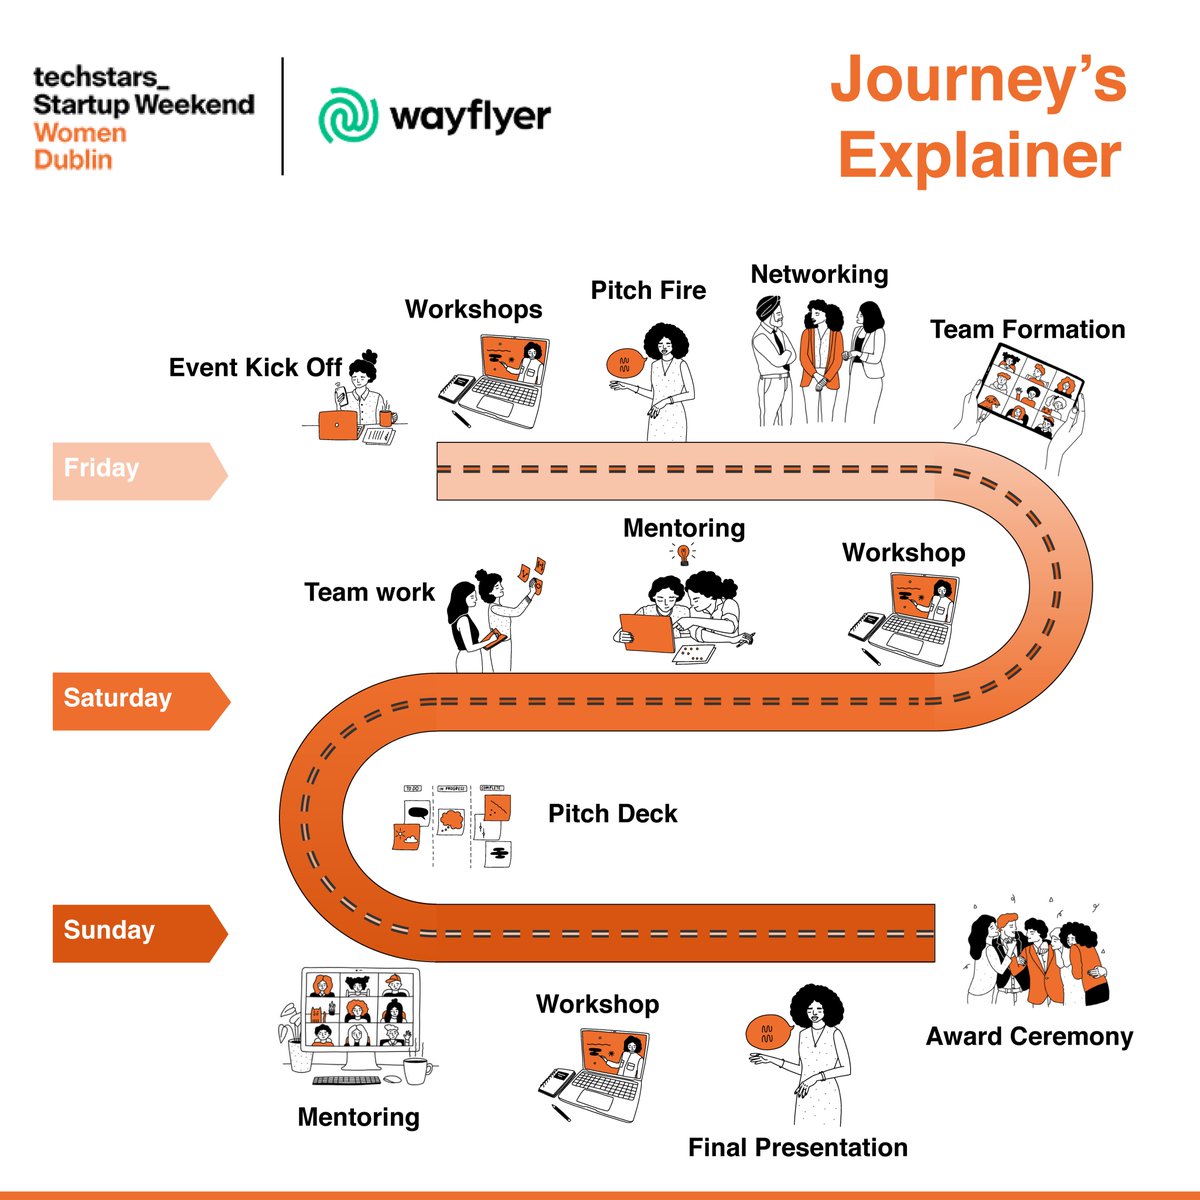 Check out our Journey's Explainer 🚀

From Friday to Sunday, from idea to business this is how our thrilling @swdubwomen will go by

Register to the upcoming #Techstars Startup Weekend Women #Dublin 25 - 27th March
event.techstars.com/event/NSF5eTvy……

#SWDubWomen2022 #womeninbusiness #sgds